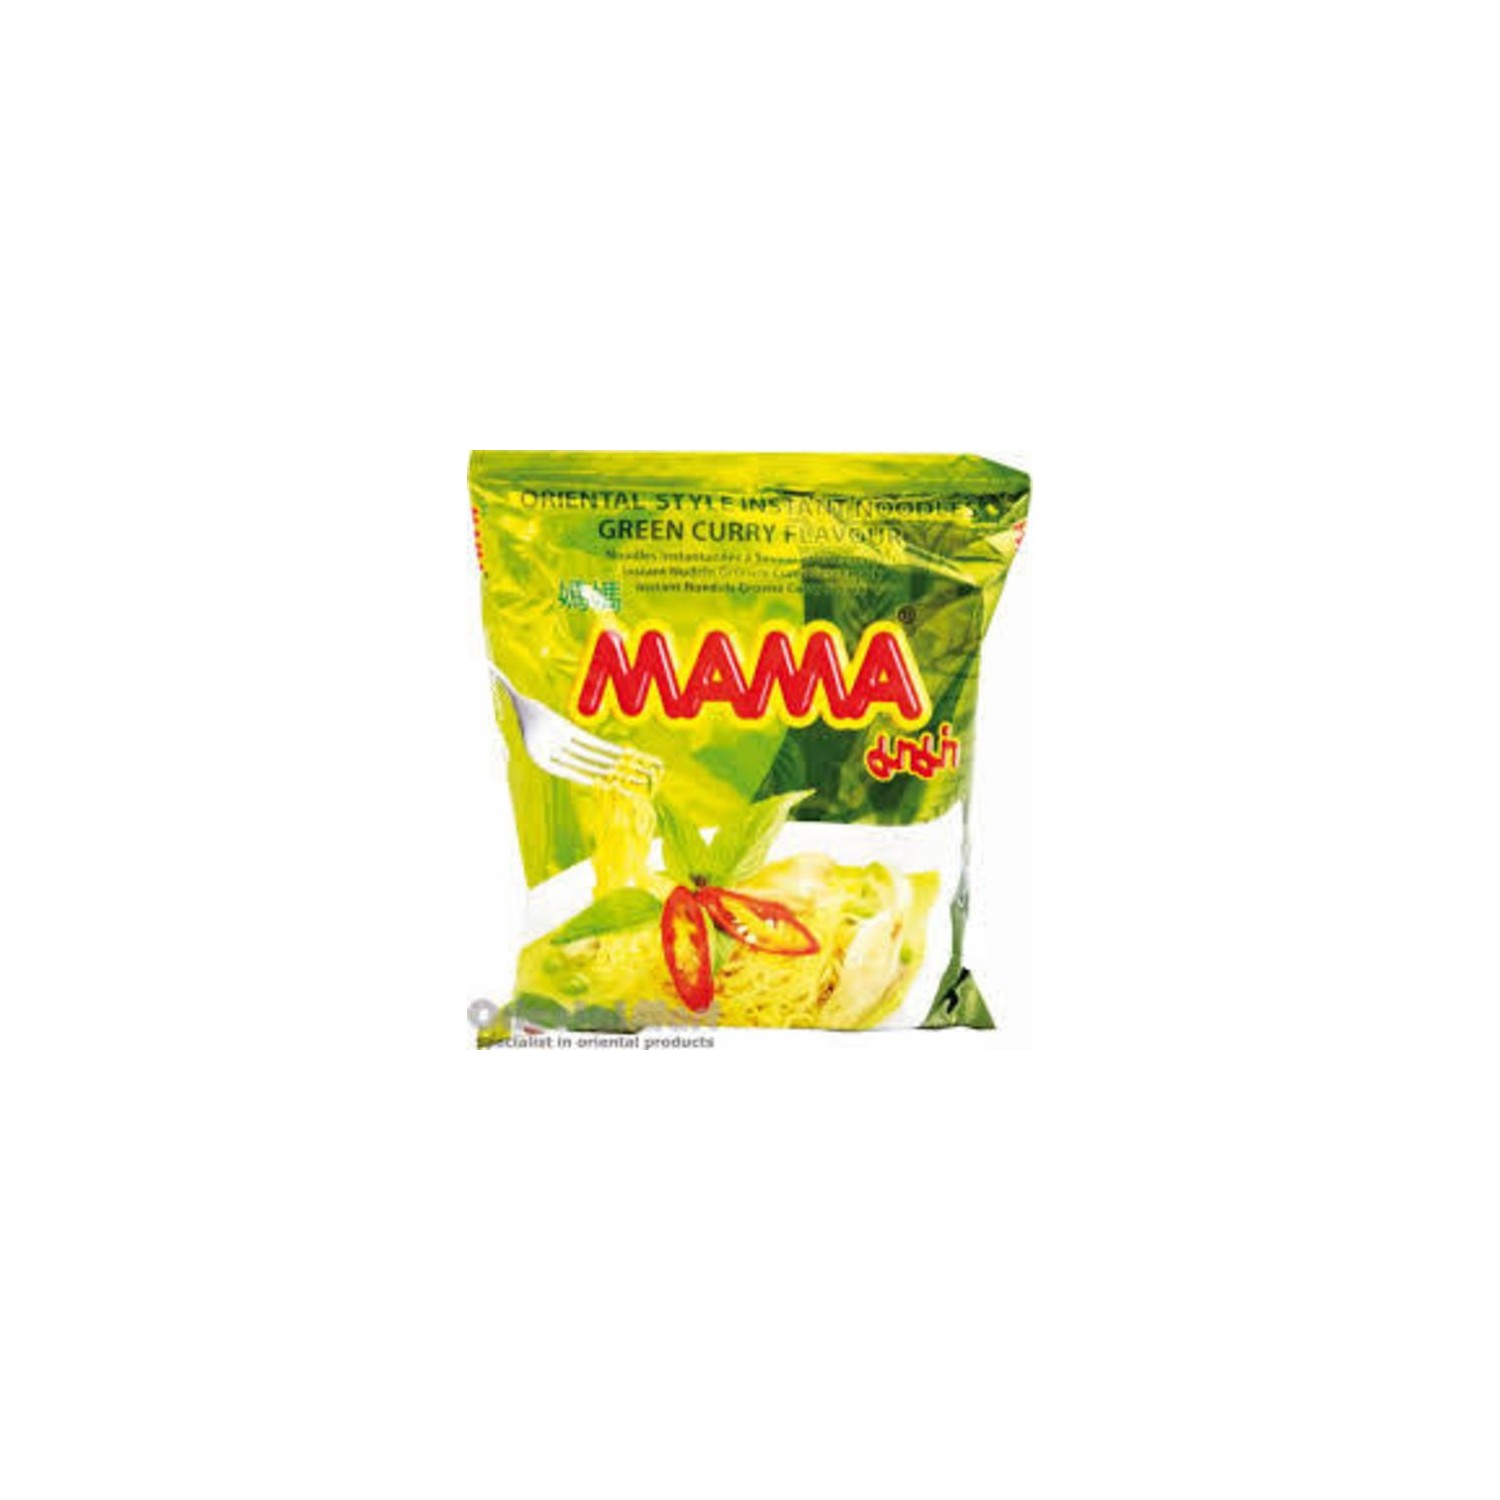 Mama Noodles 55g Green Curry Flavour Instant Thai Yellow Noodles